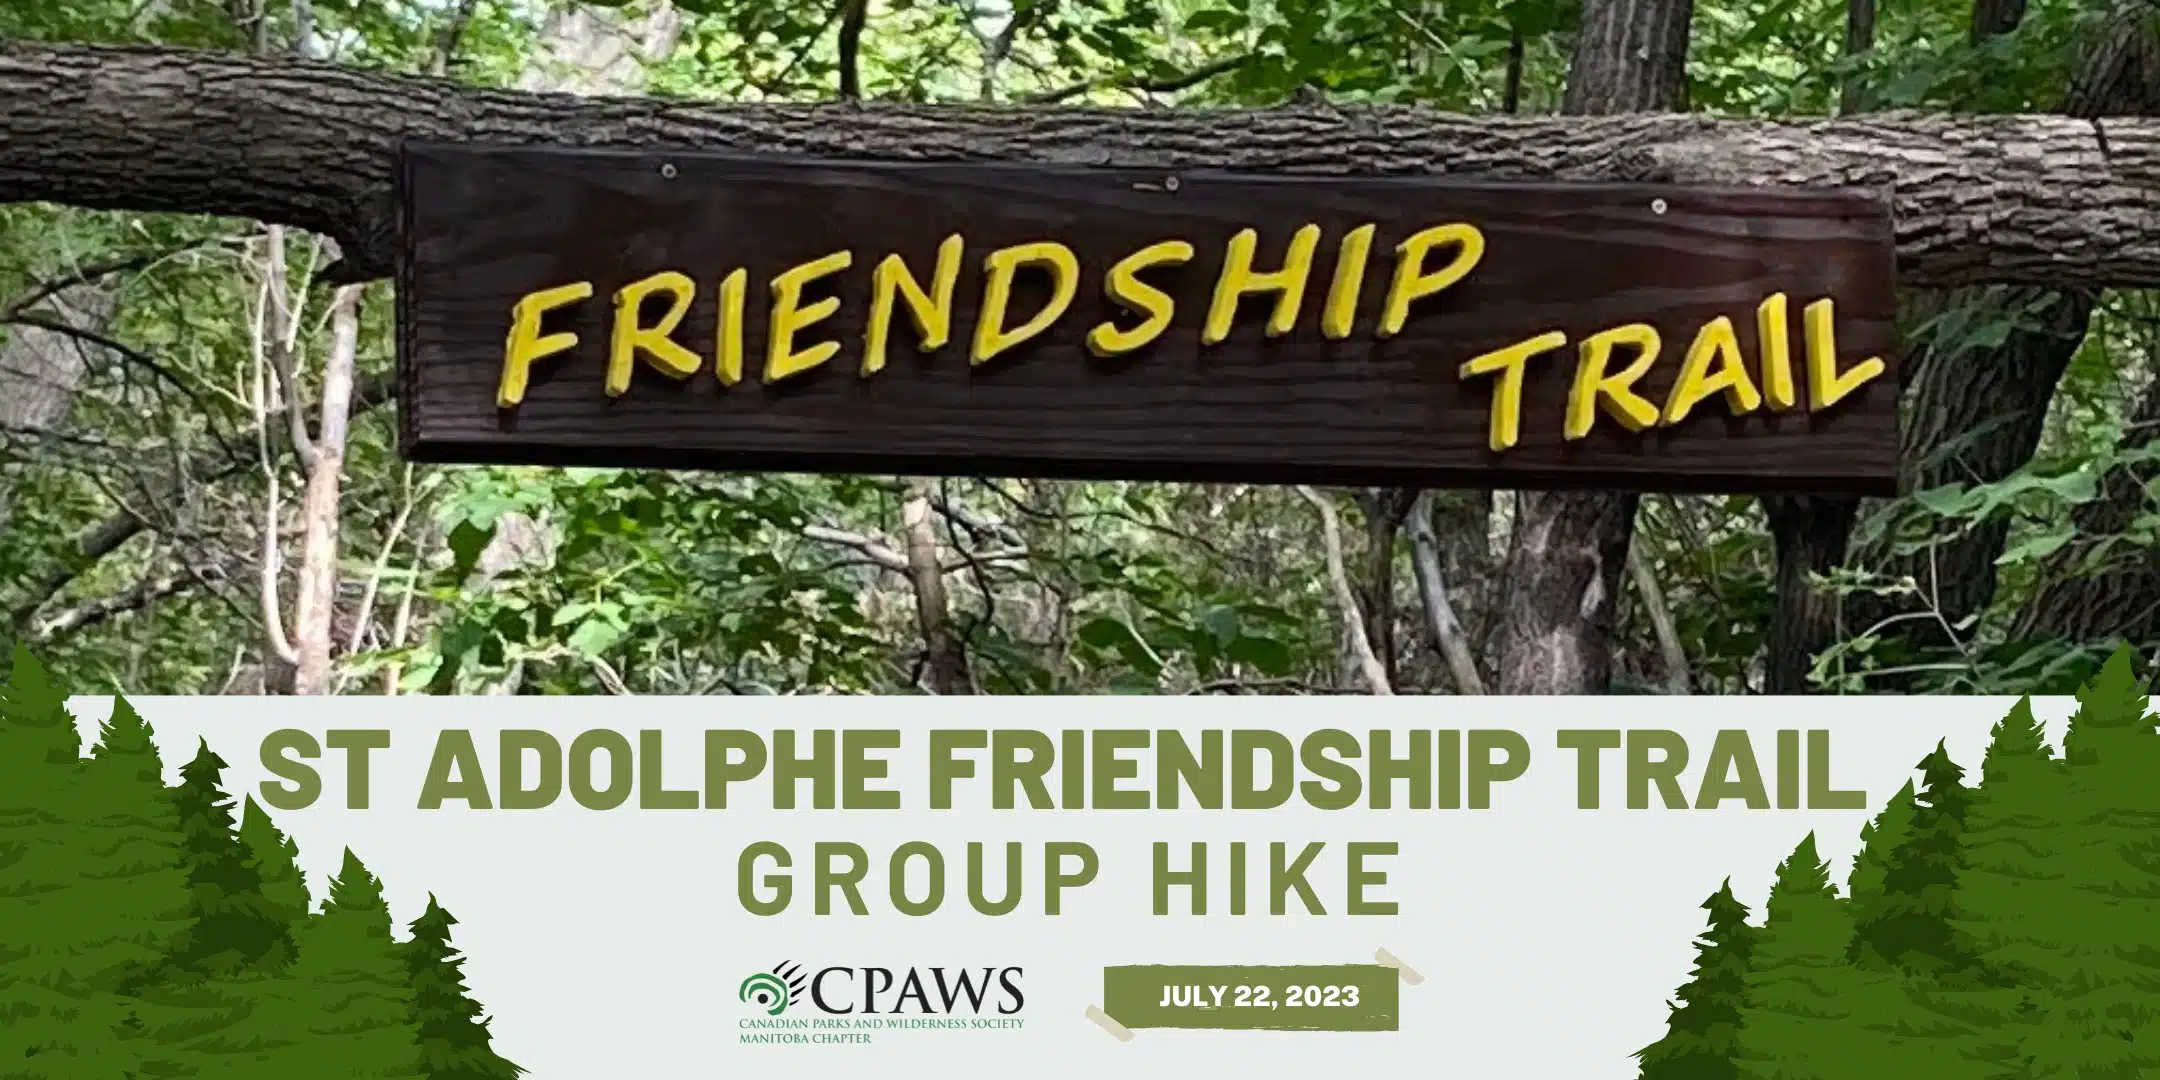 Join CPAWS Manitoba for a group hike on the St Adolphe Friendship Trail just south of Winnipeg.